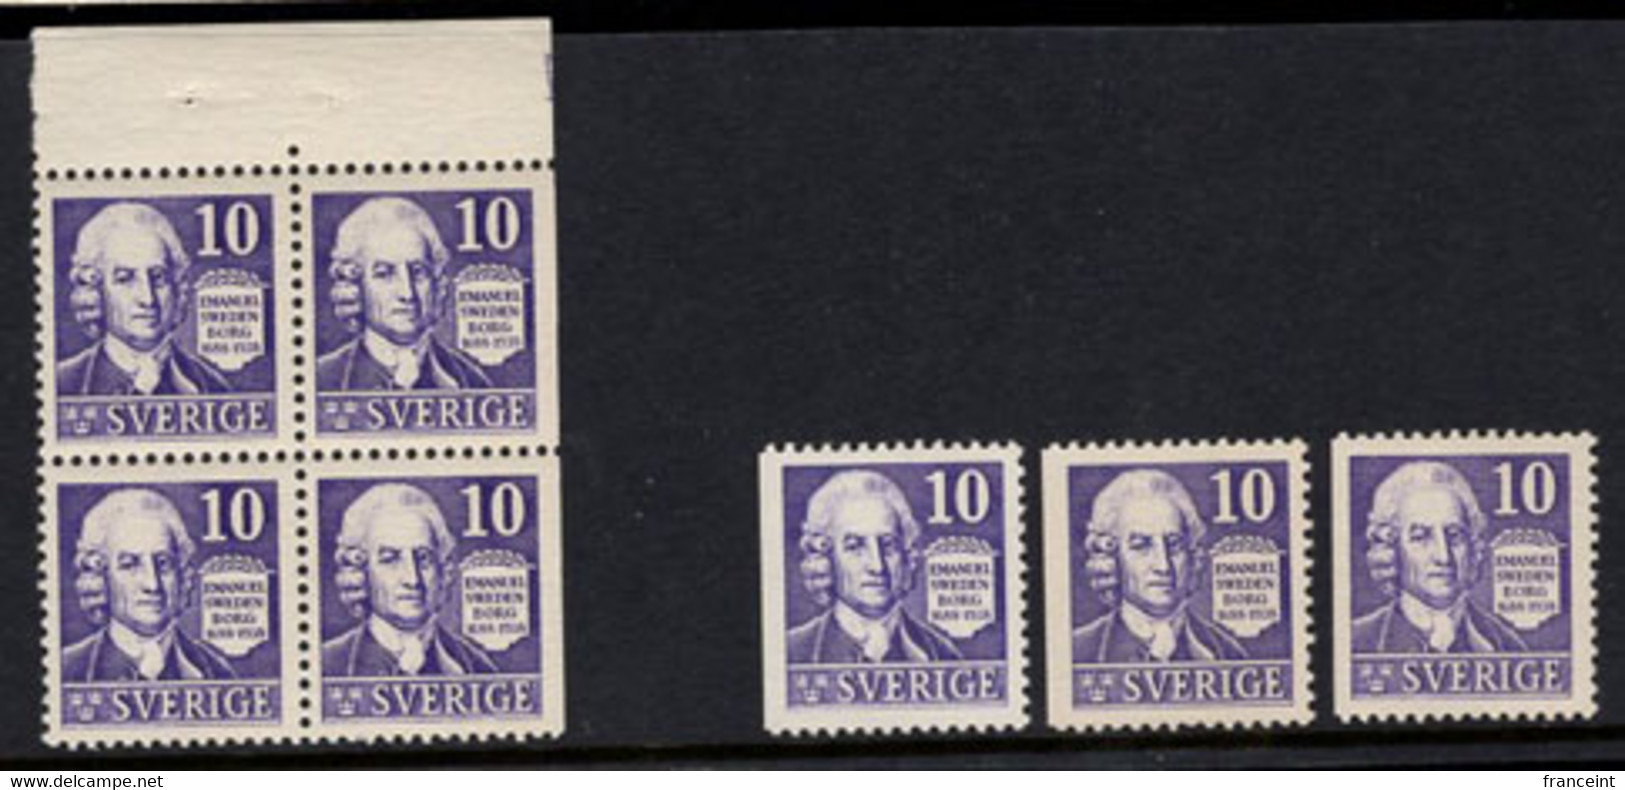 SWEDEN(1938) Emanuel Swedenborg. Registered FDC With Cachet. Scott Nos 264-6. This Lot Includes Several 10o Varieties - Errors, Freaks & Oddities (EFO)